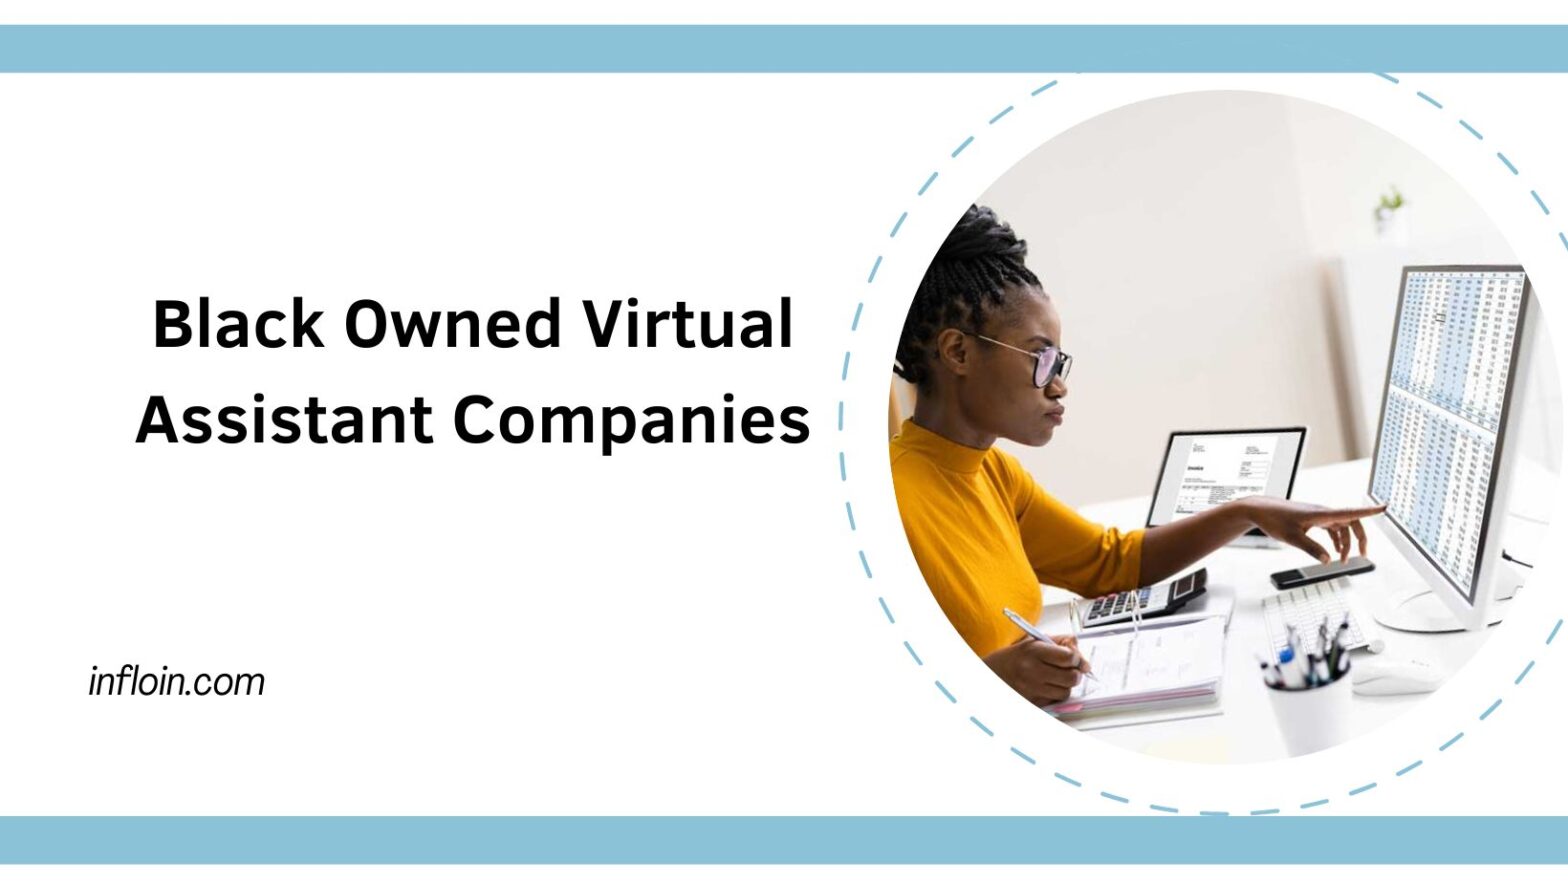 Black Owned Virtual Assistant Companies